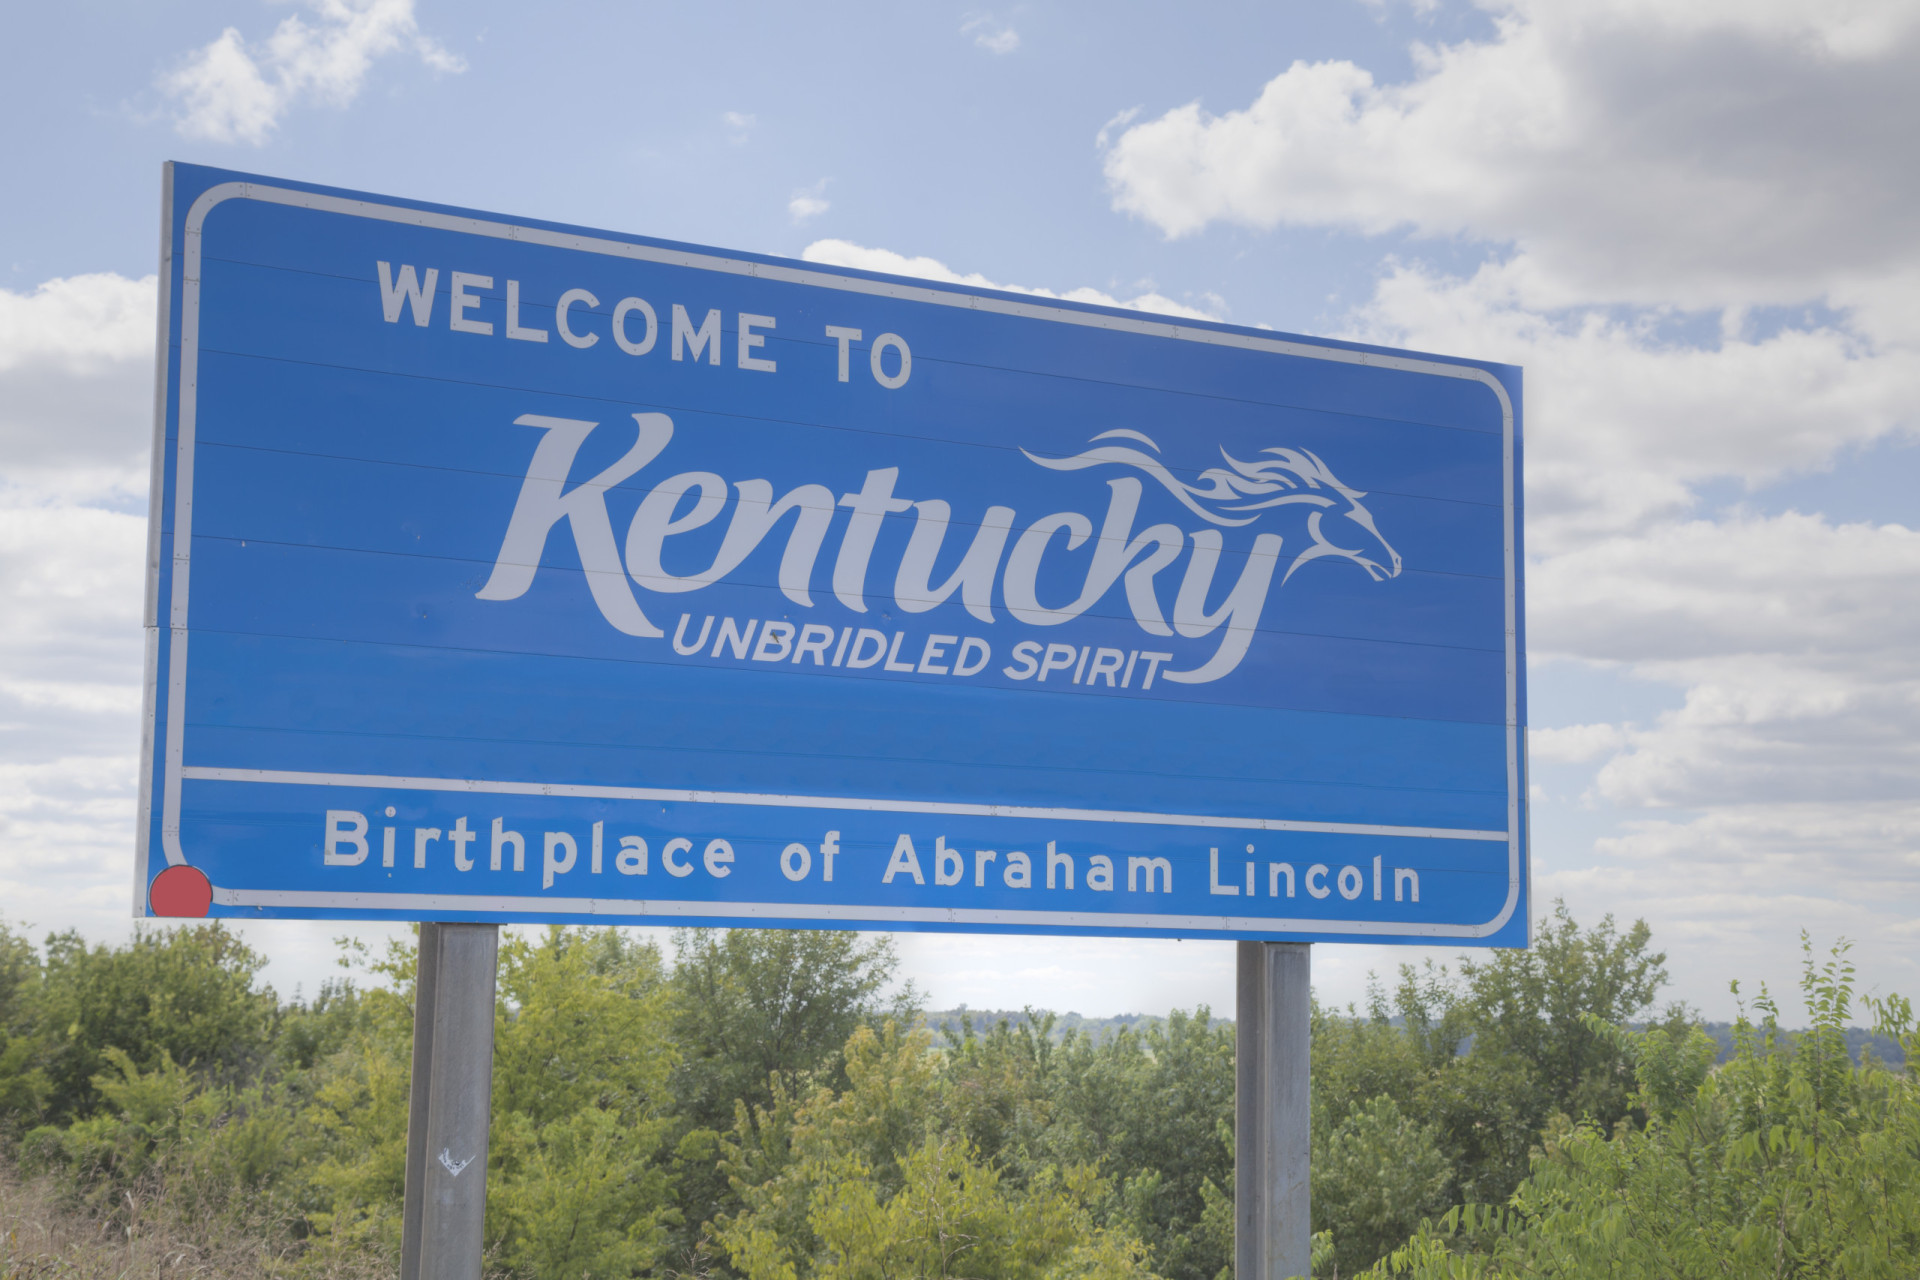 <p>Illinois may be "The Land of Lincoln," but Kentucky was the US president's birthplace. The state welcome sign also makes reference to the famous horse race, the Kentucky Derby.</p><p><a href="https://www.msn.com/en-us/community/channel/vid-7xx8mnucu55yw63we9va2gwr7uihbxwc68fxqp25x6tg4ftibpra?cvid=94631541bc0f4f89bfd59158d696ad7e">Follow us and access great exclusive content every day</a></p>